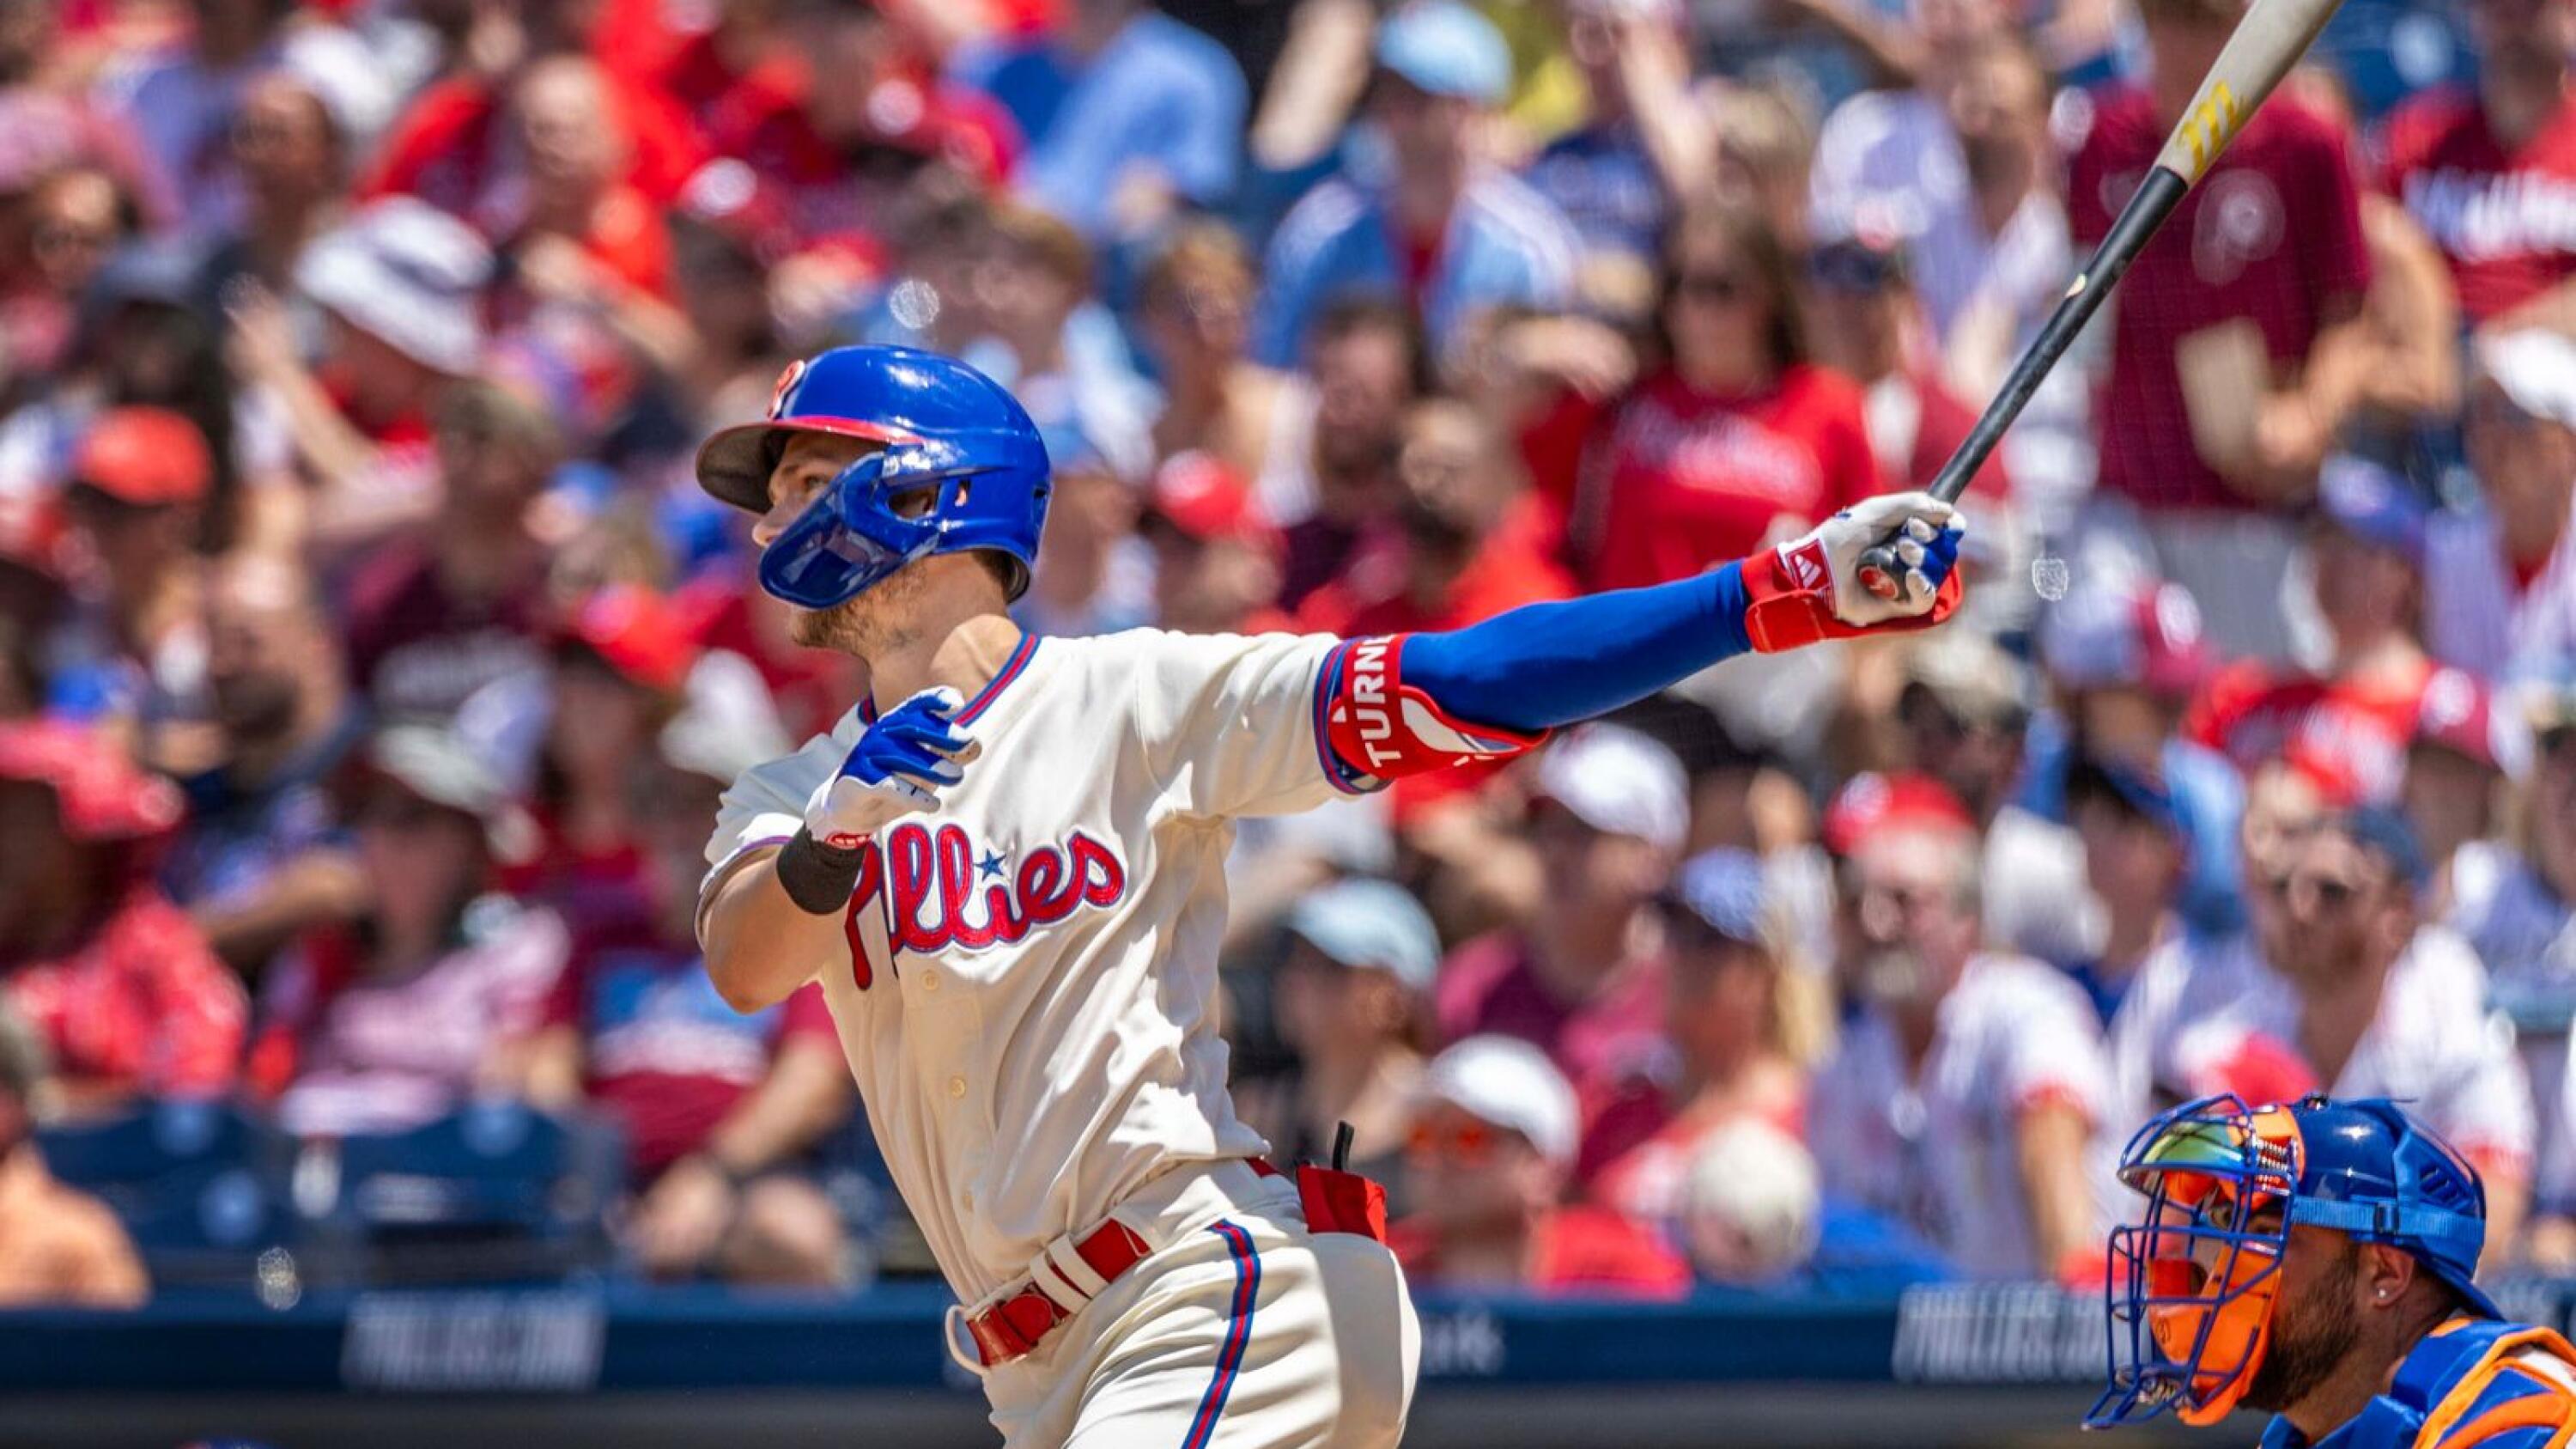 Don't call it a comeback; Phillies 7, Mets 6 - The Good Phight